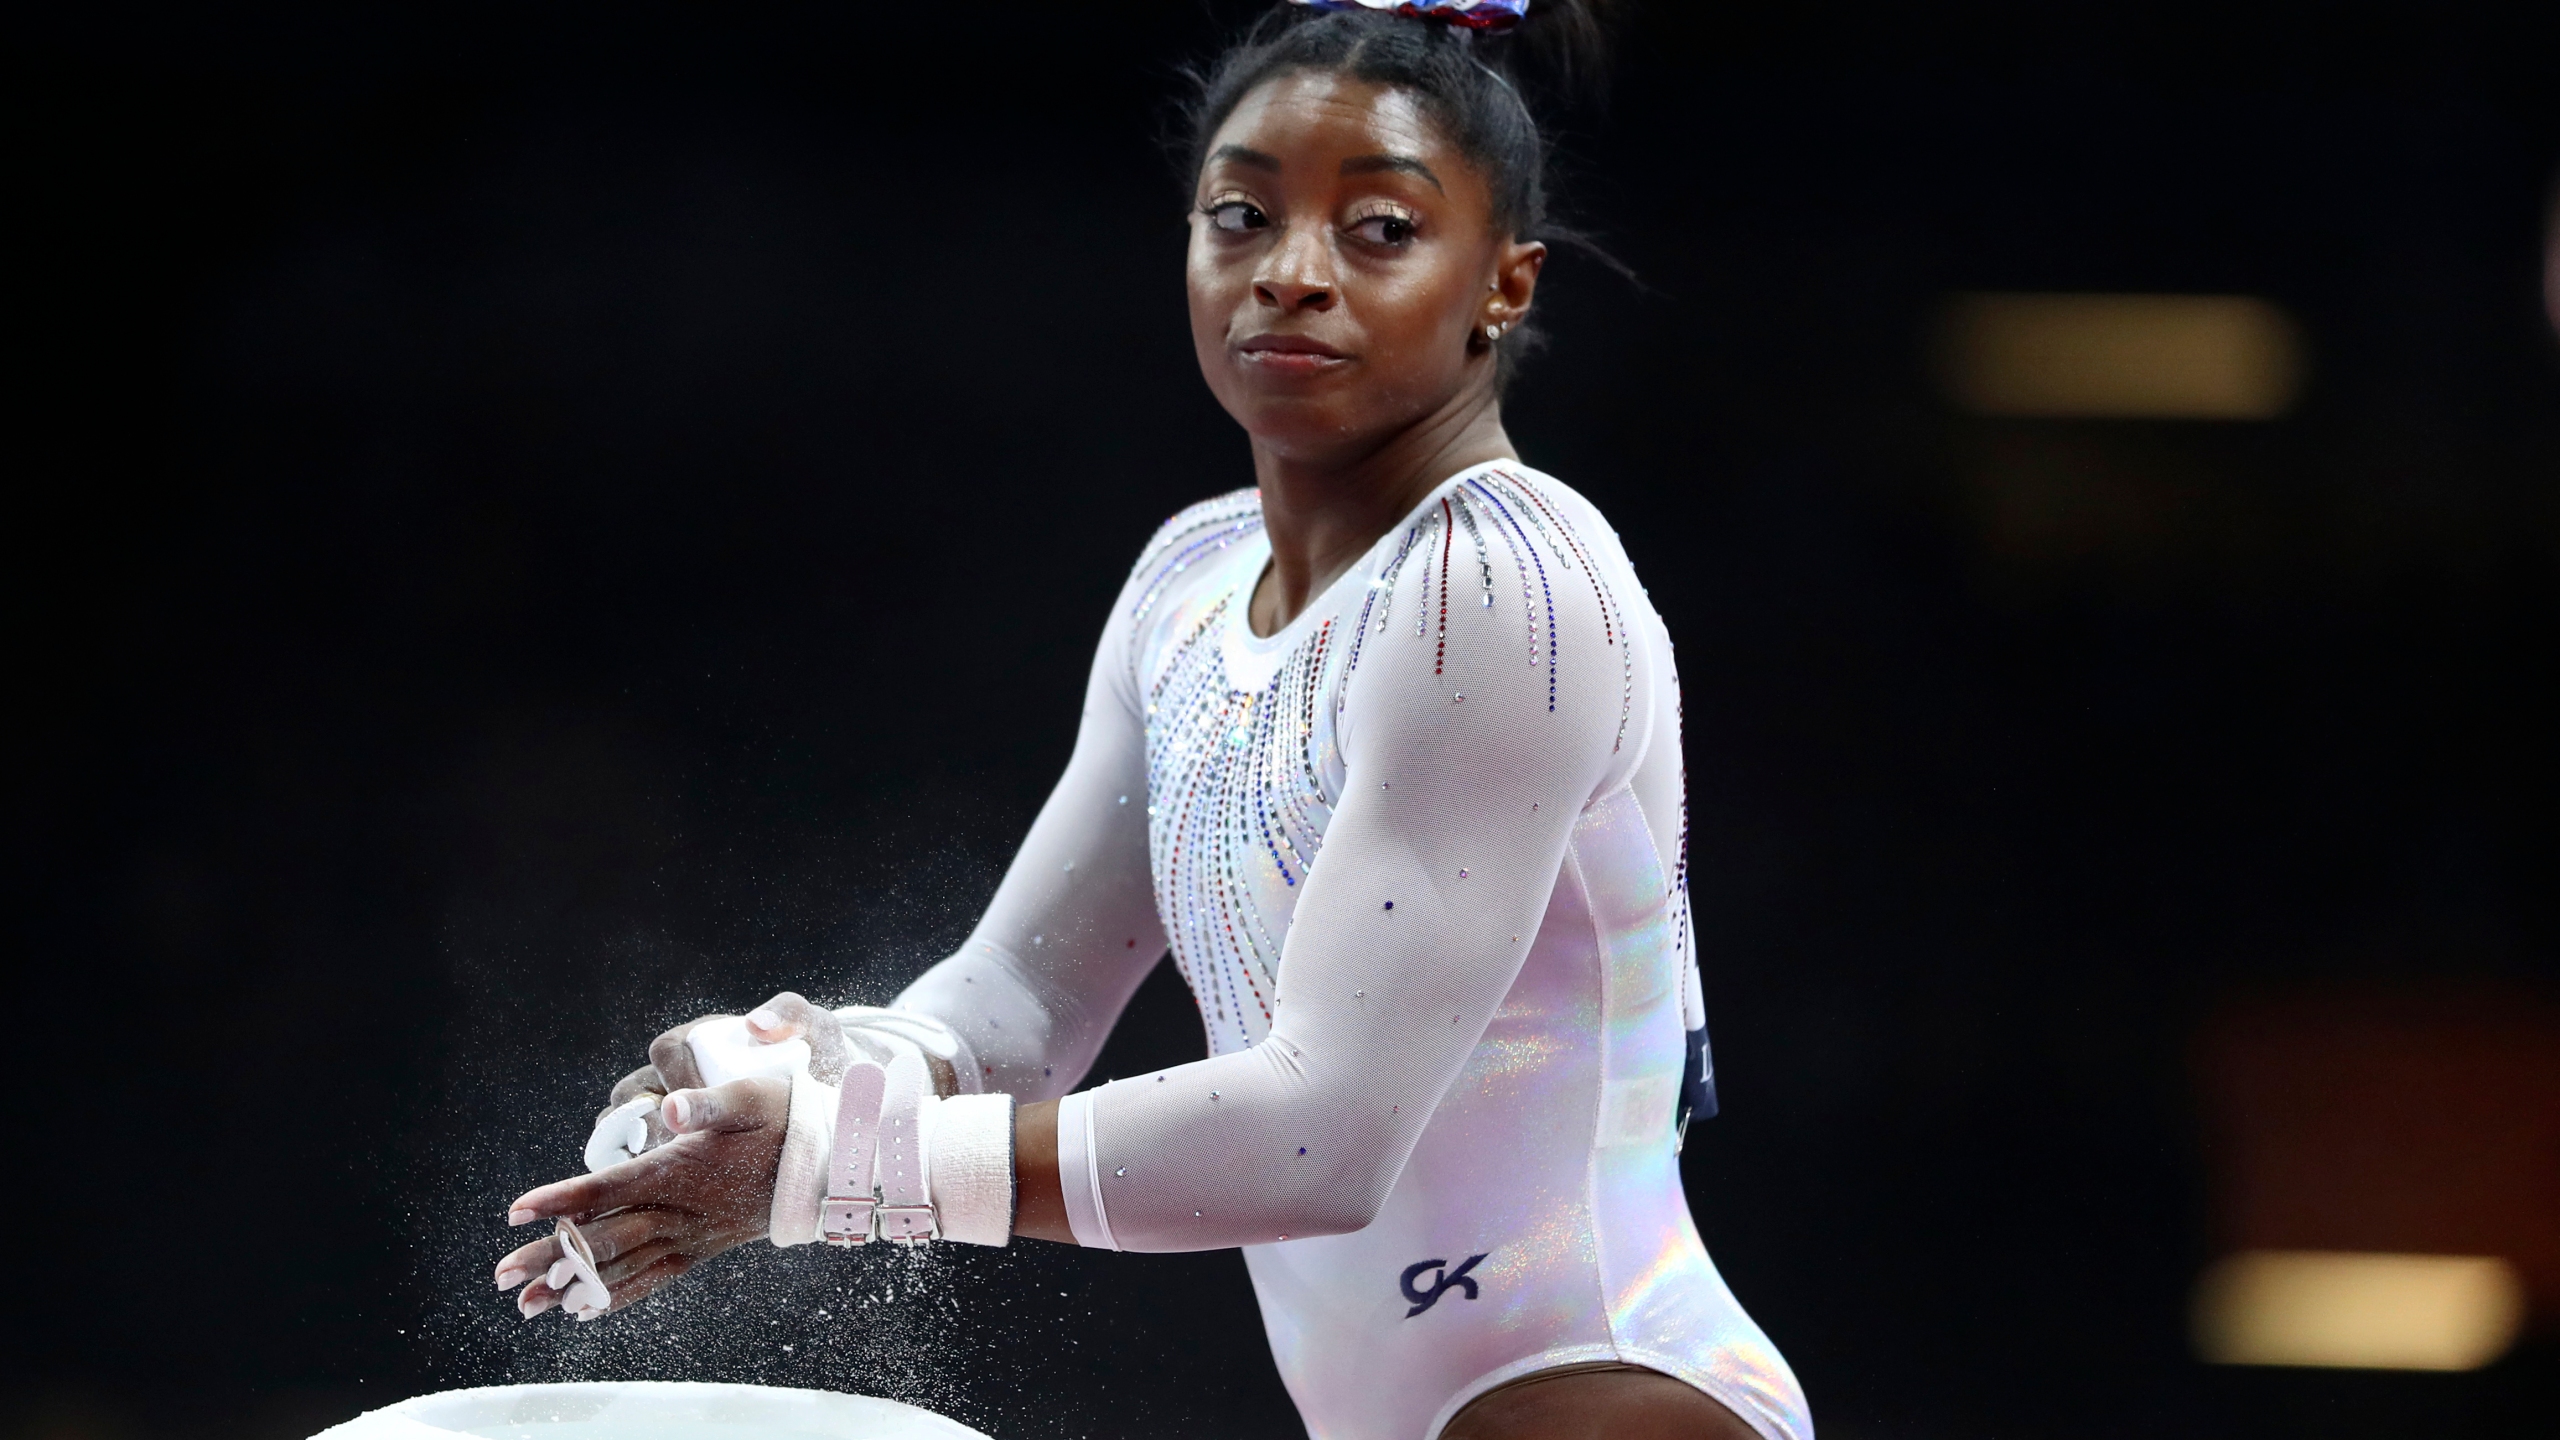 Simone Biles returning to competition ahead of USA Gymnastics Trials in St. Louis next month